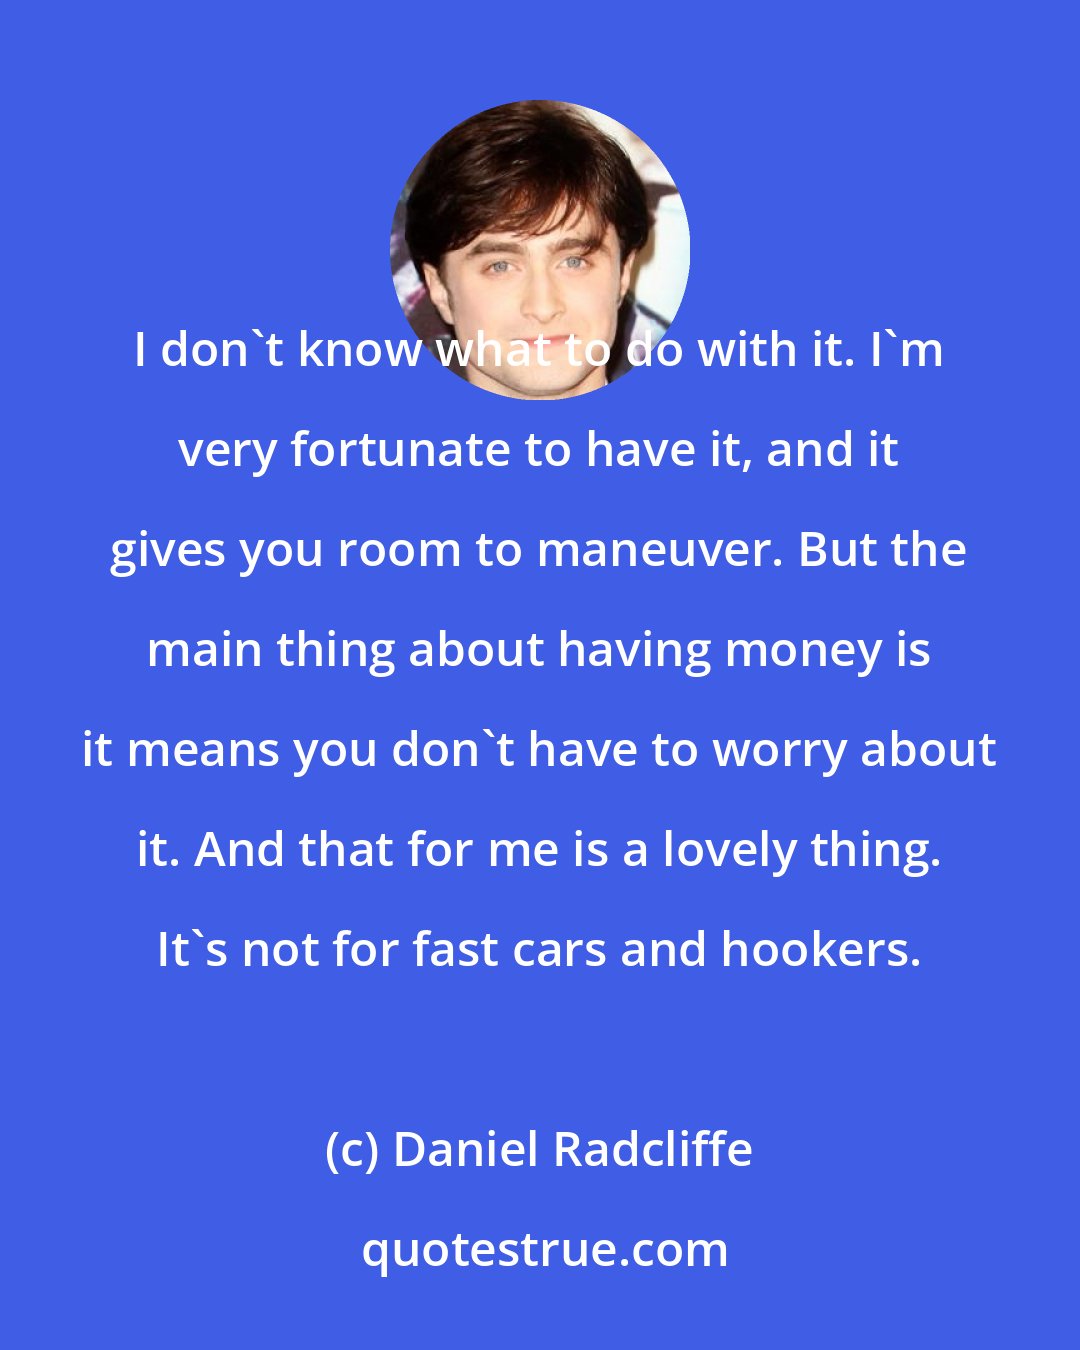 Daniel Radcliffe: I don't know what to do with it. I'm very fortunate to have it, and it gives you room to maneuver. But the main thing about having money is it means you don't have to worry about it. And that for me is a lovely thing. It's not for fast cars and hookers.